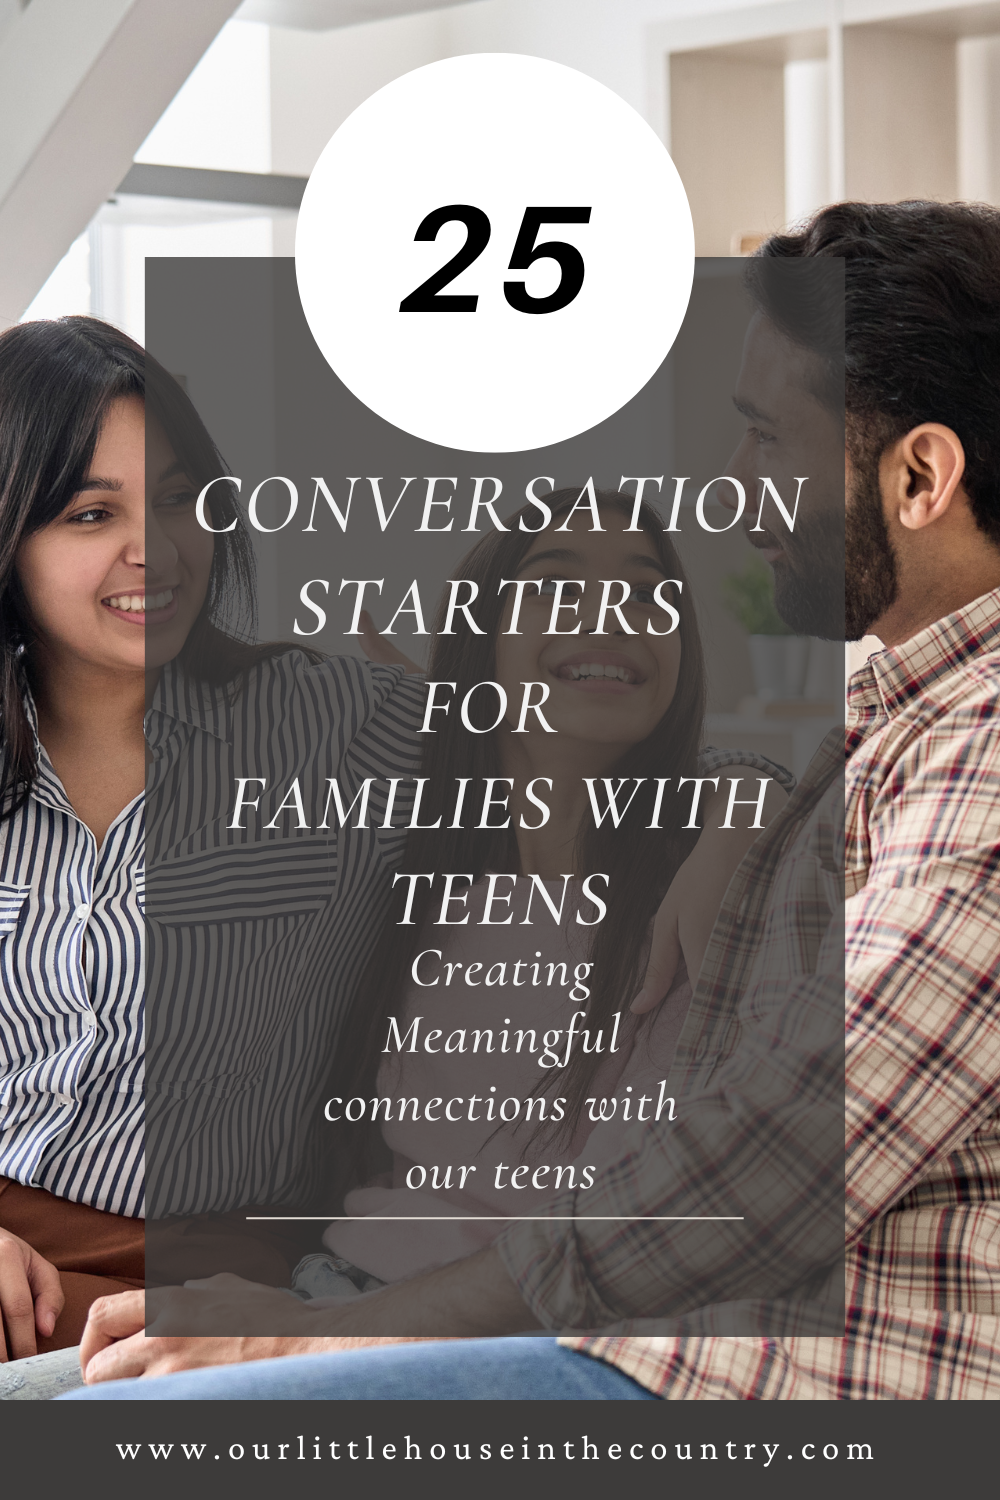 Conversation starters for families with teenagers